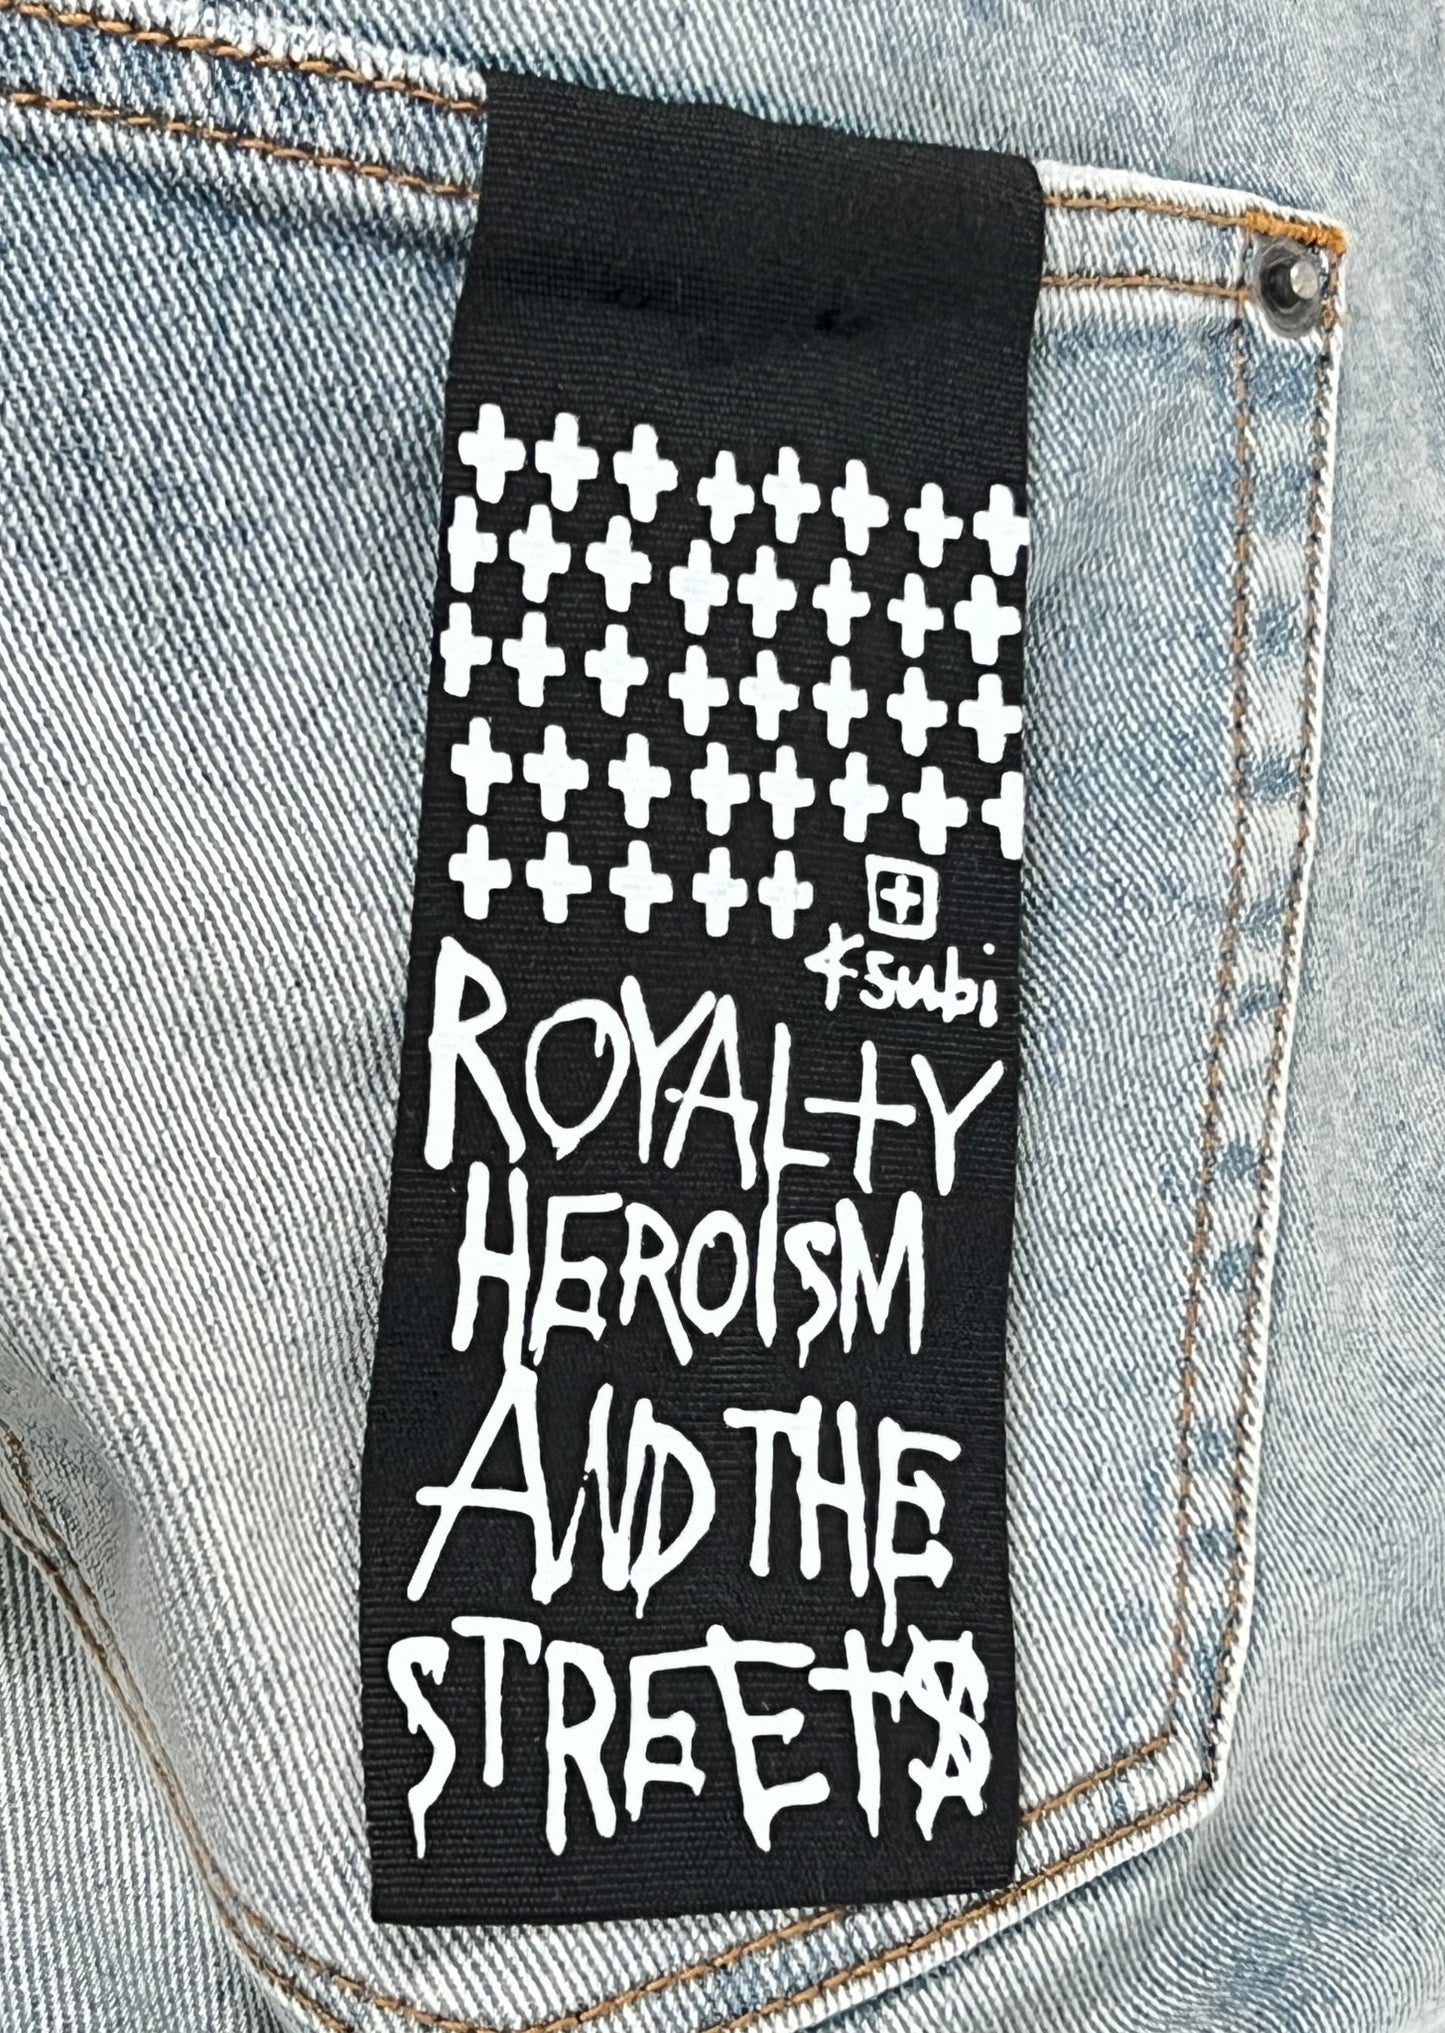 Black fabric label with white text reading "royalty heroism and the streets" sewn onto Ksubi Bronko Dynamite Metal Denim fabric.